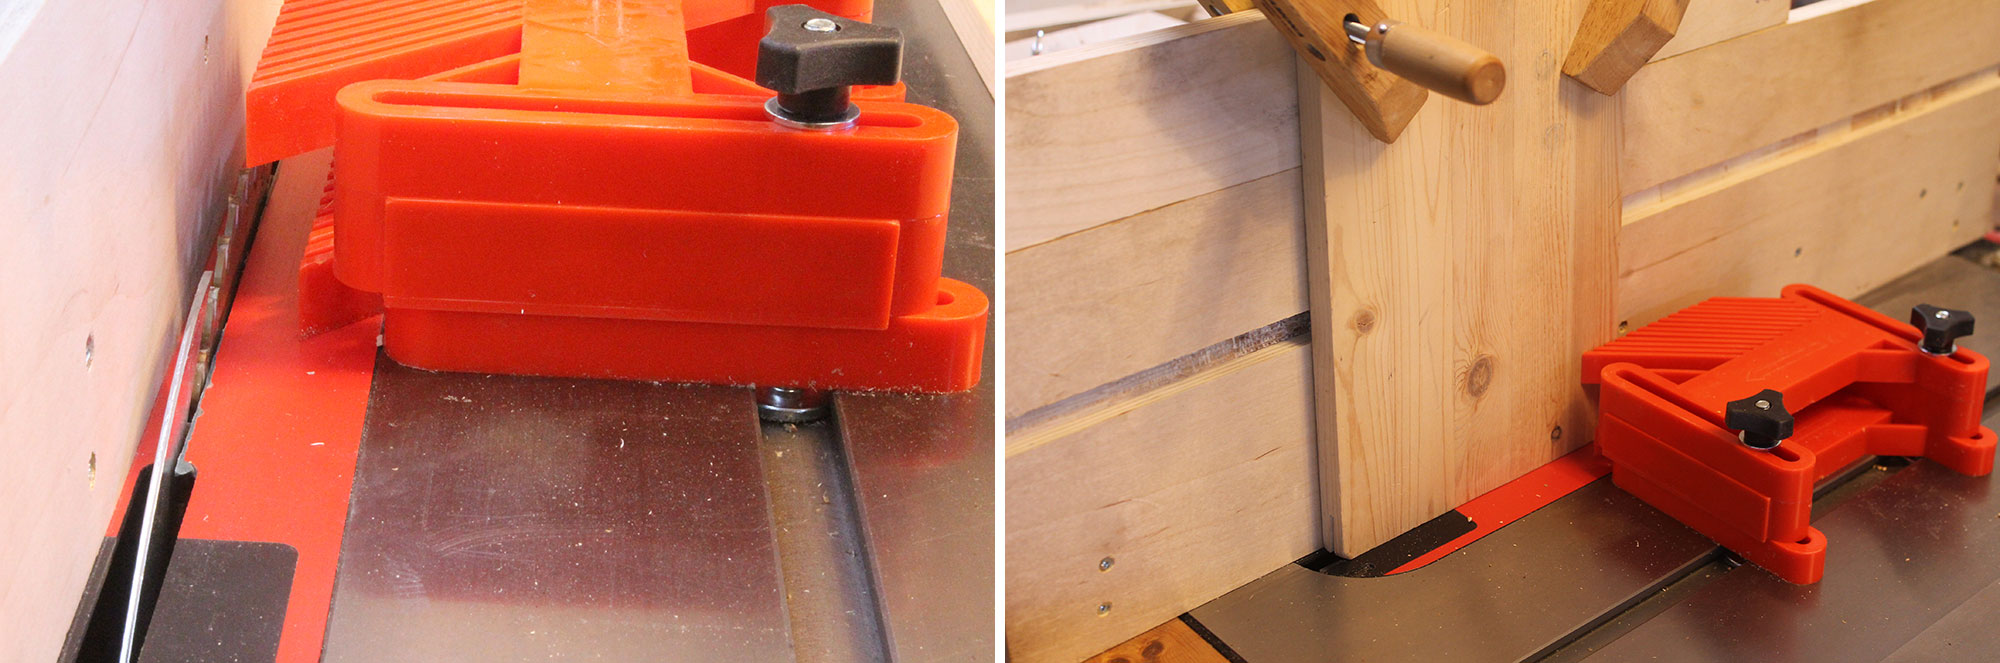 Image left: Featherboard on table saw. Image right: Featherboard and project on table saw.